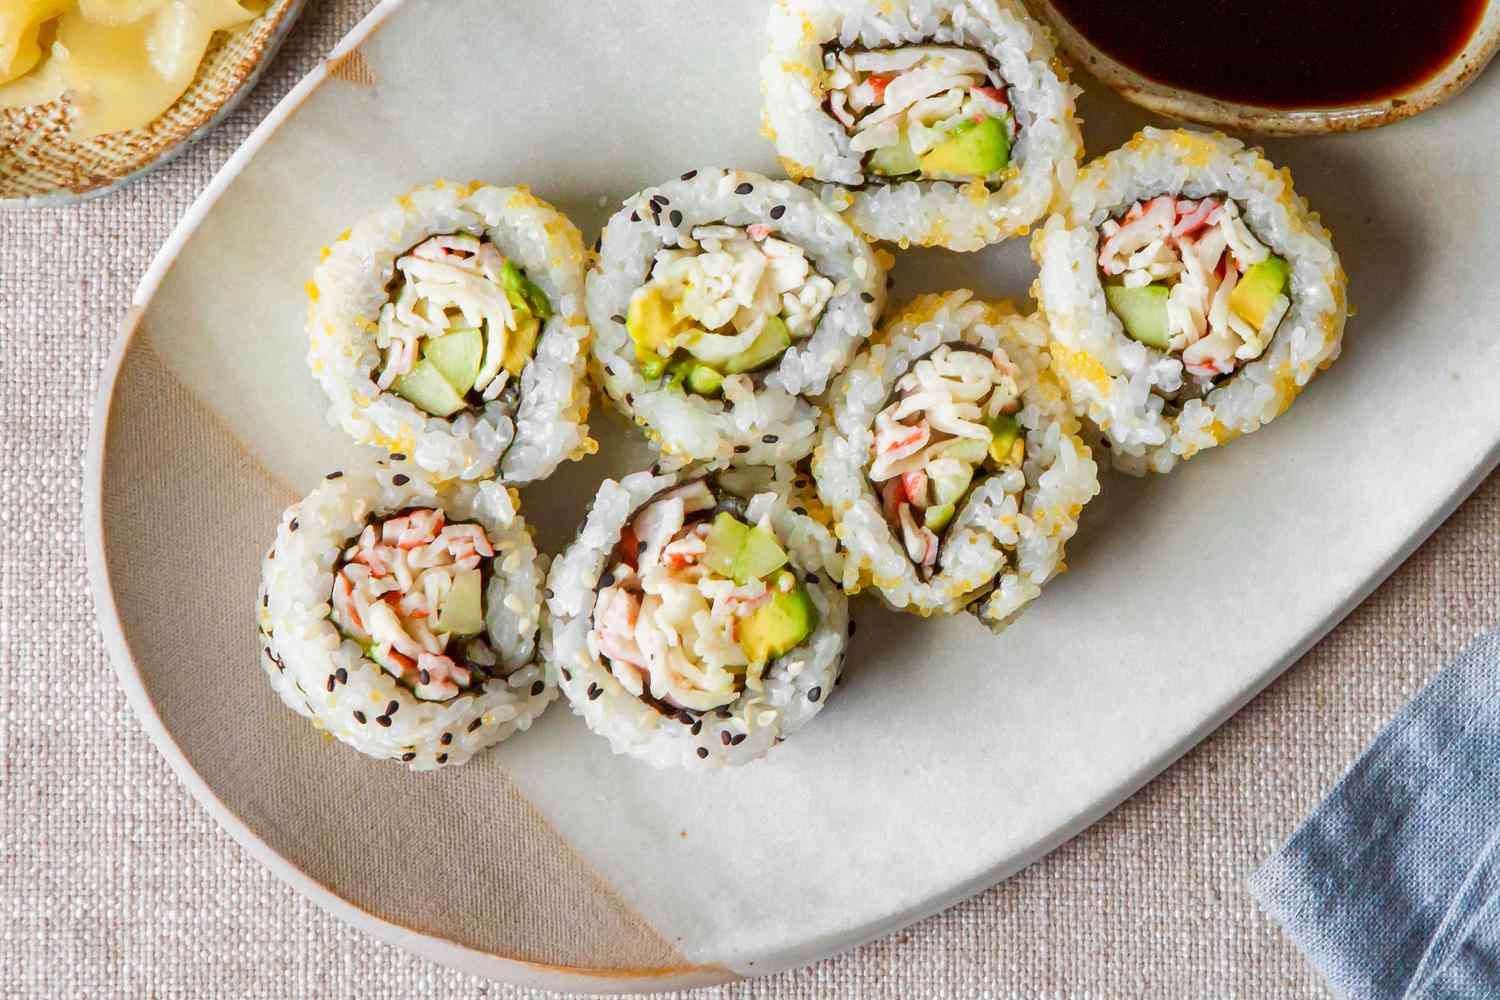 https://recipes.net/wp-content/uploads/2024/01/how-to-make-sushi-at-home-california-rolls-1704529280.jpg